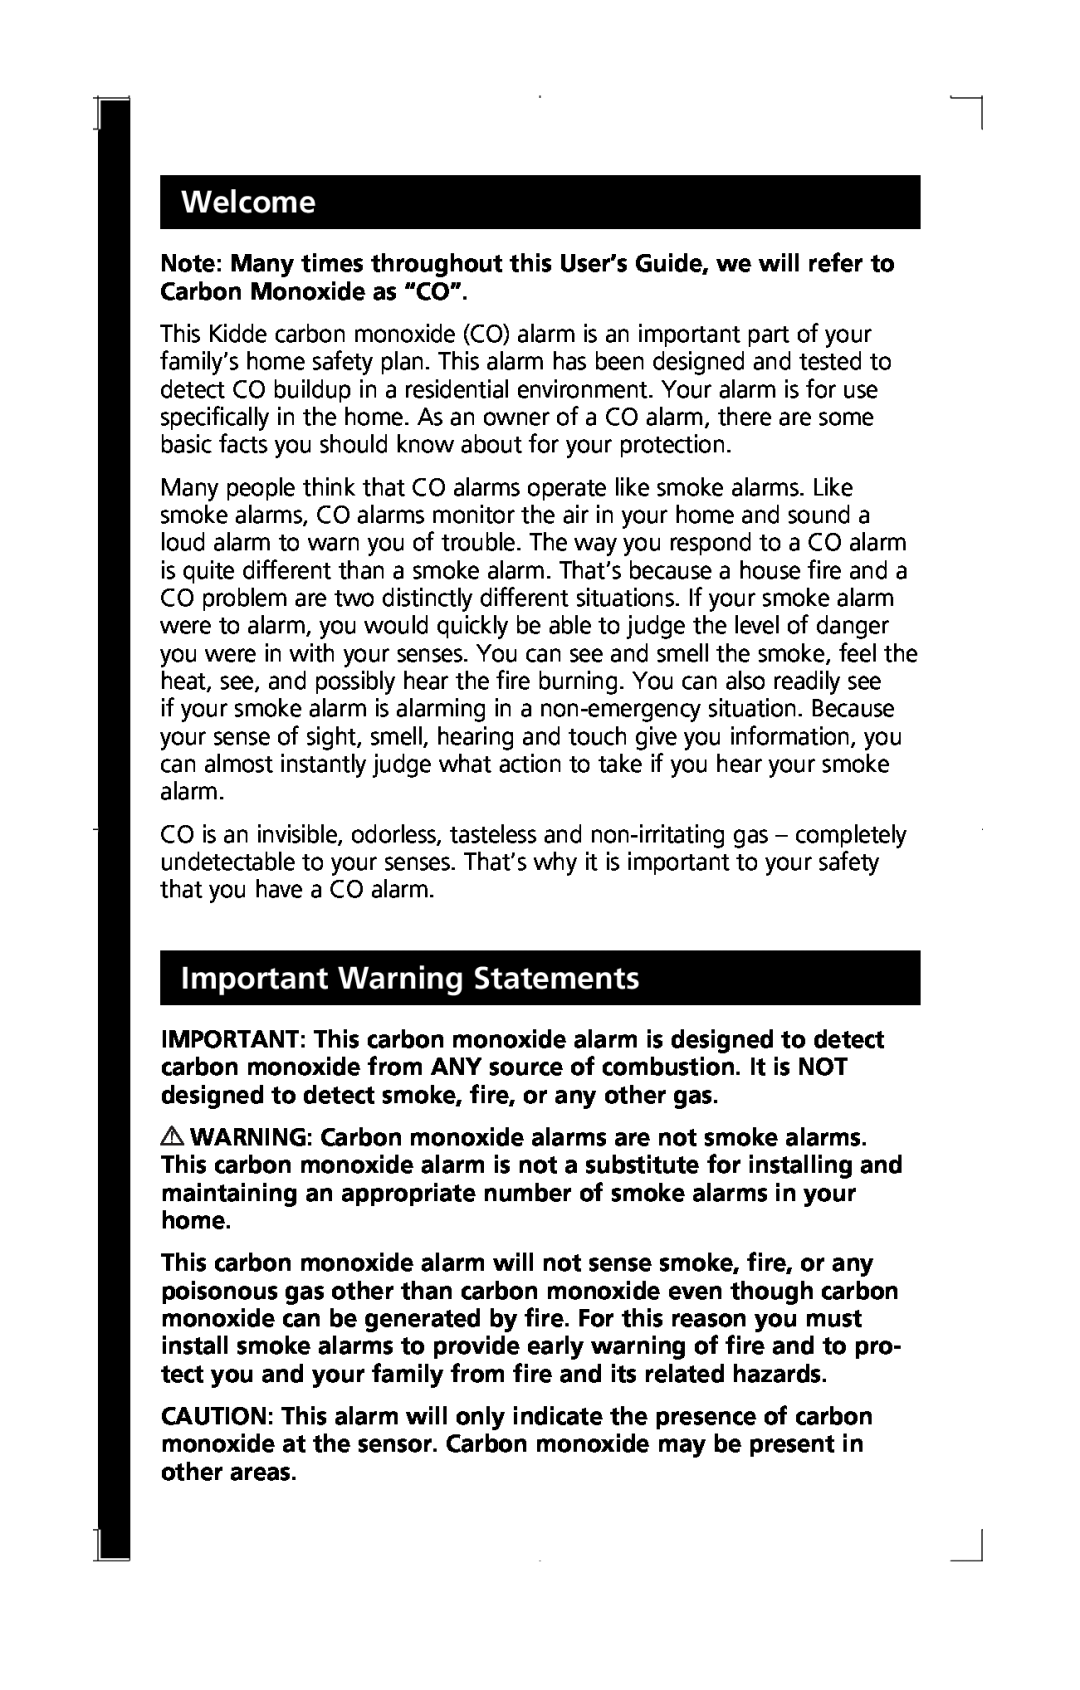 Kidde C3010-D manual Welcome, Important Warning Statements 